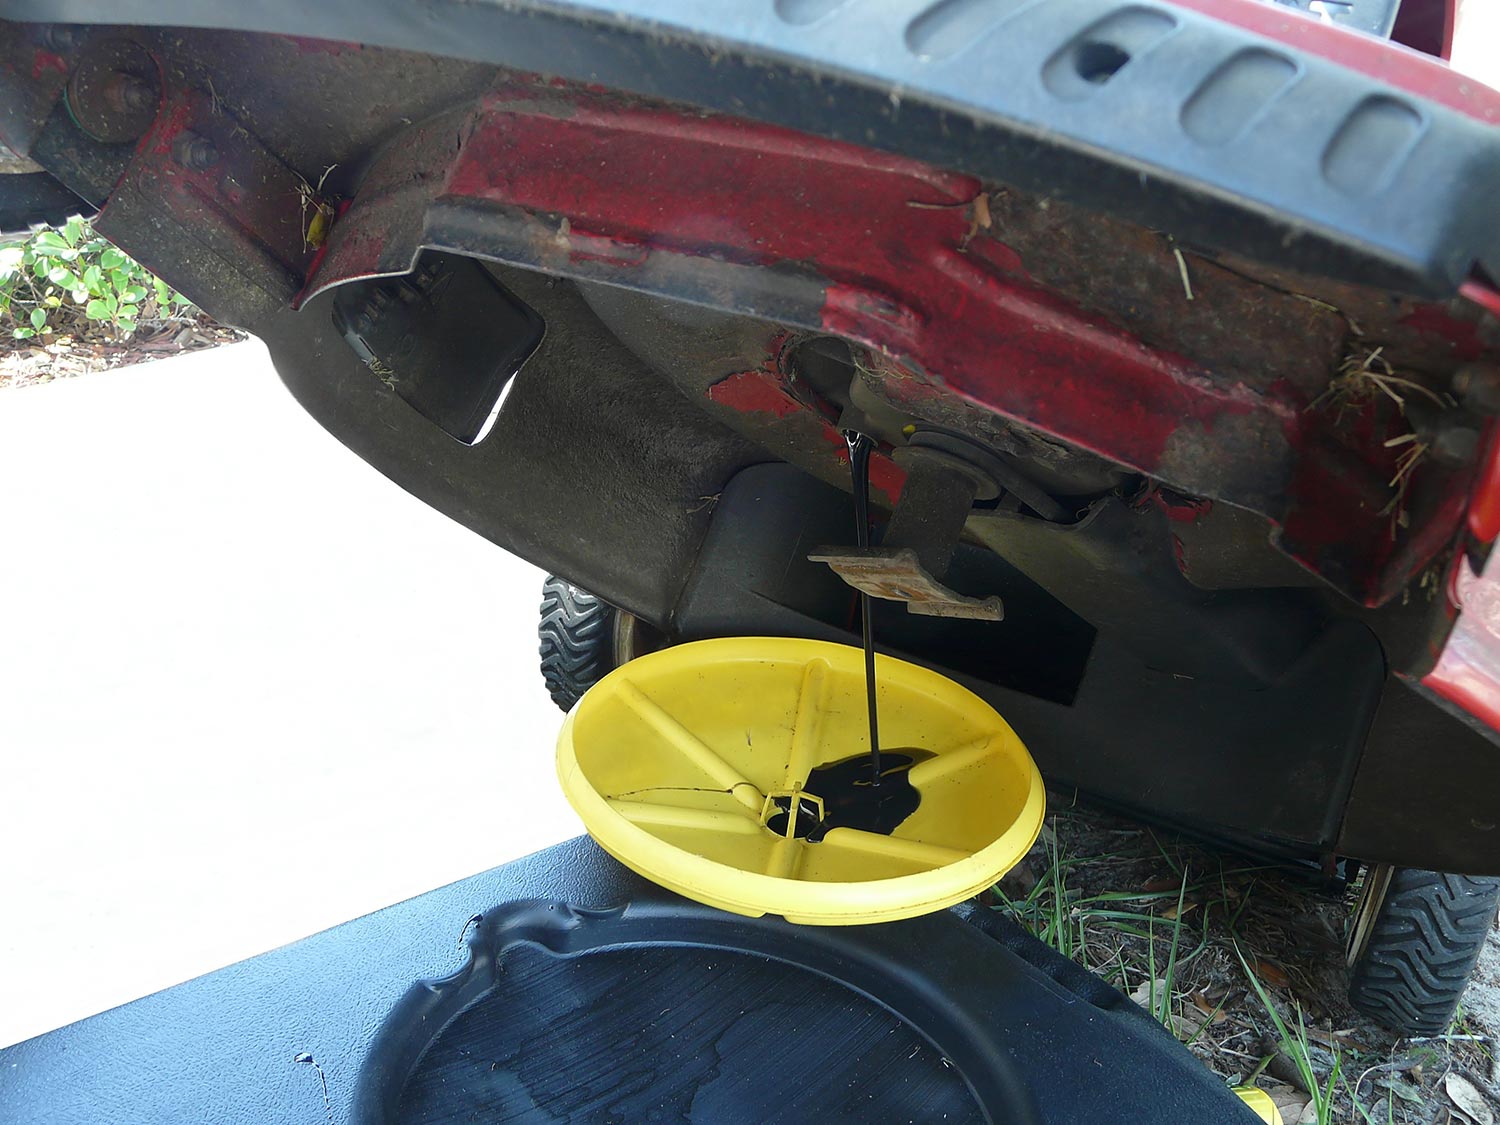 Oil draining into a yellow and black container during an oil change on a red lawn mower